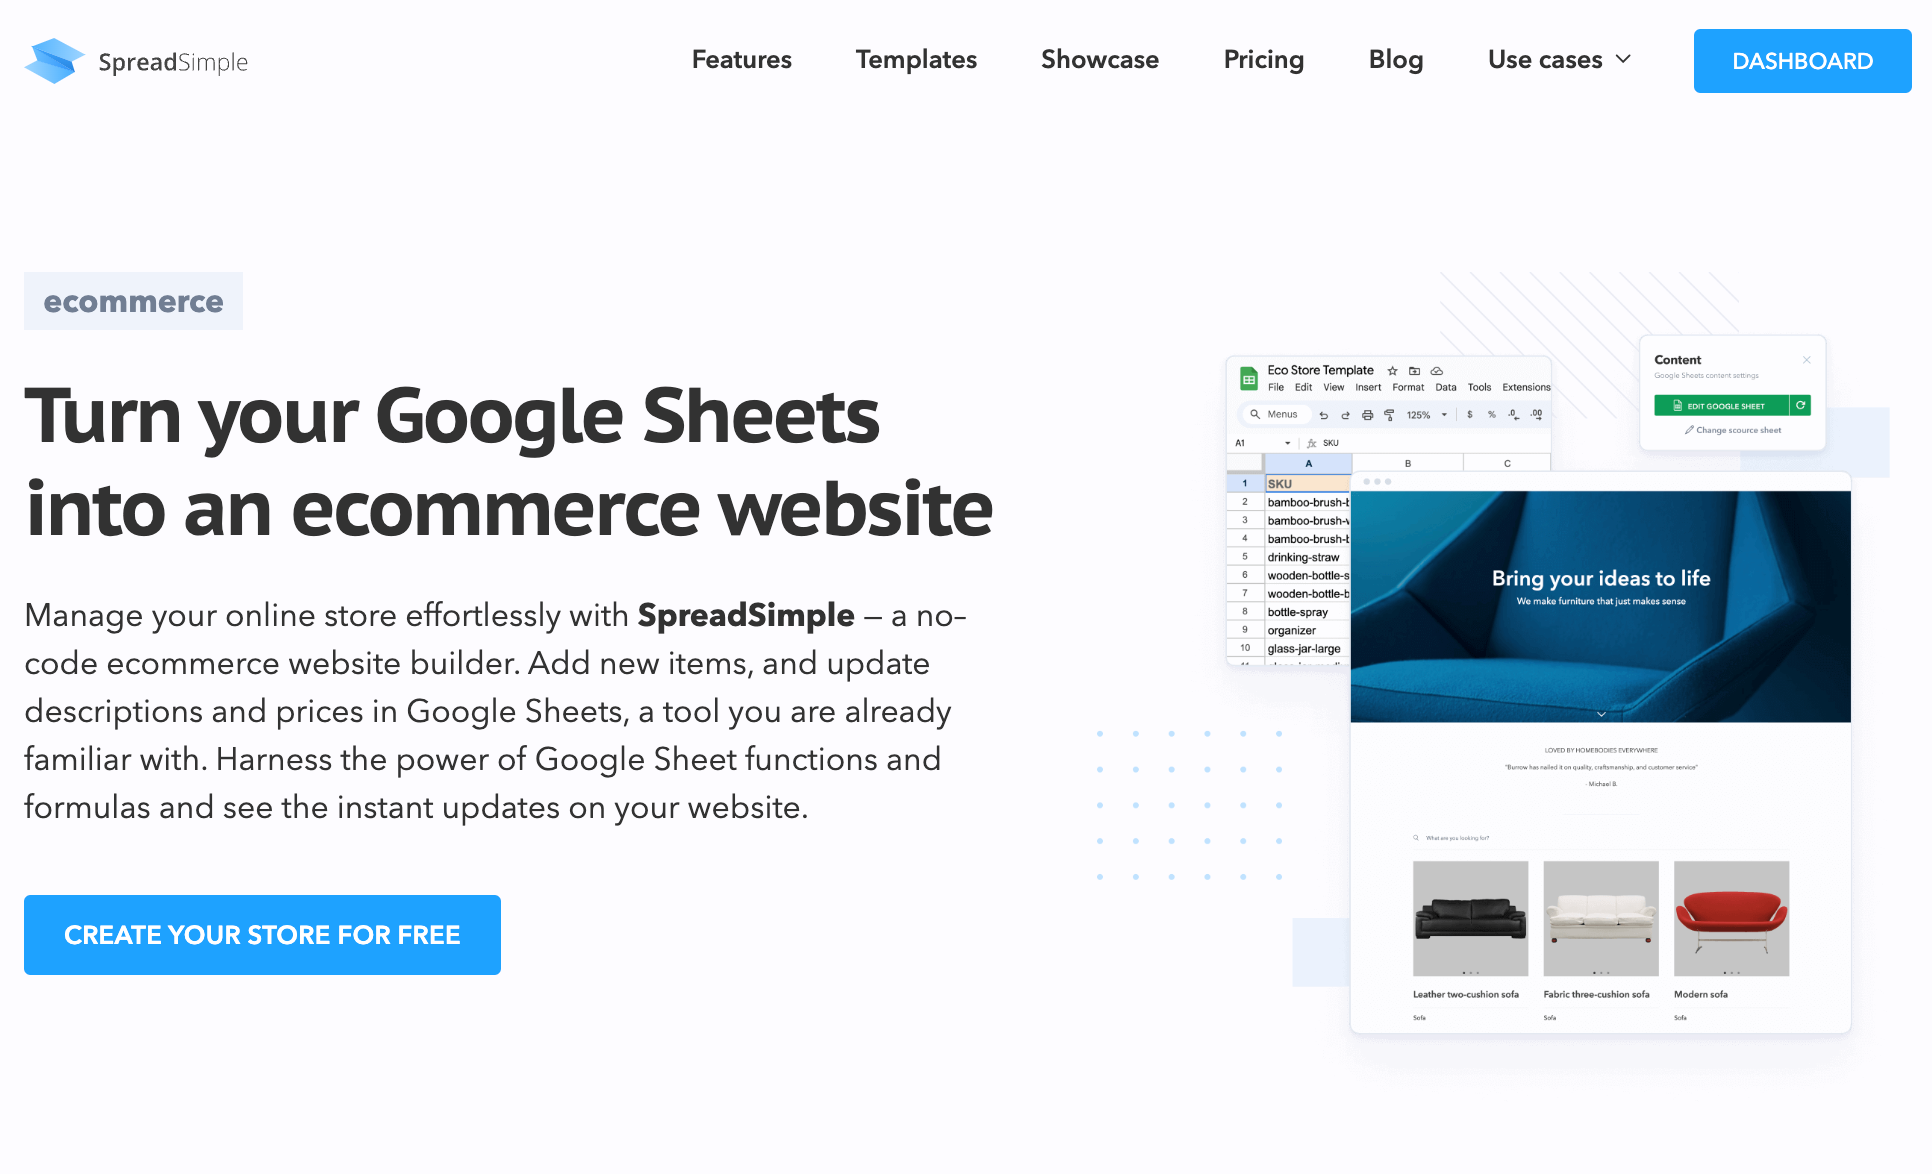 Turn your Google Sheets into an ecommerce website